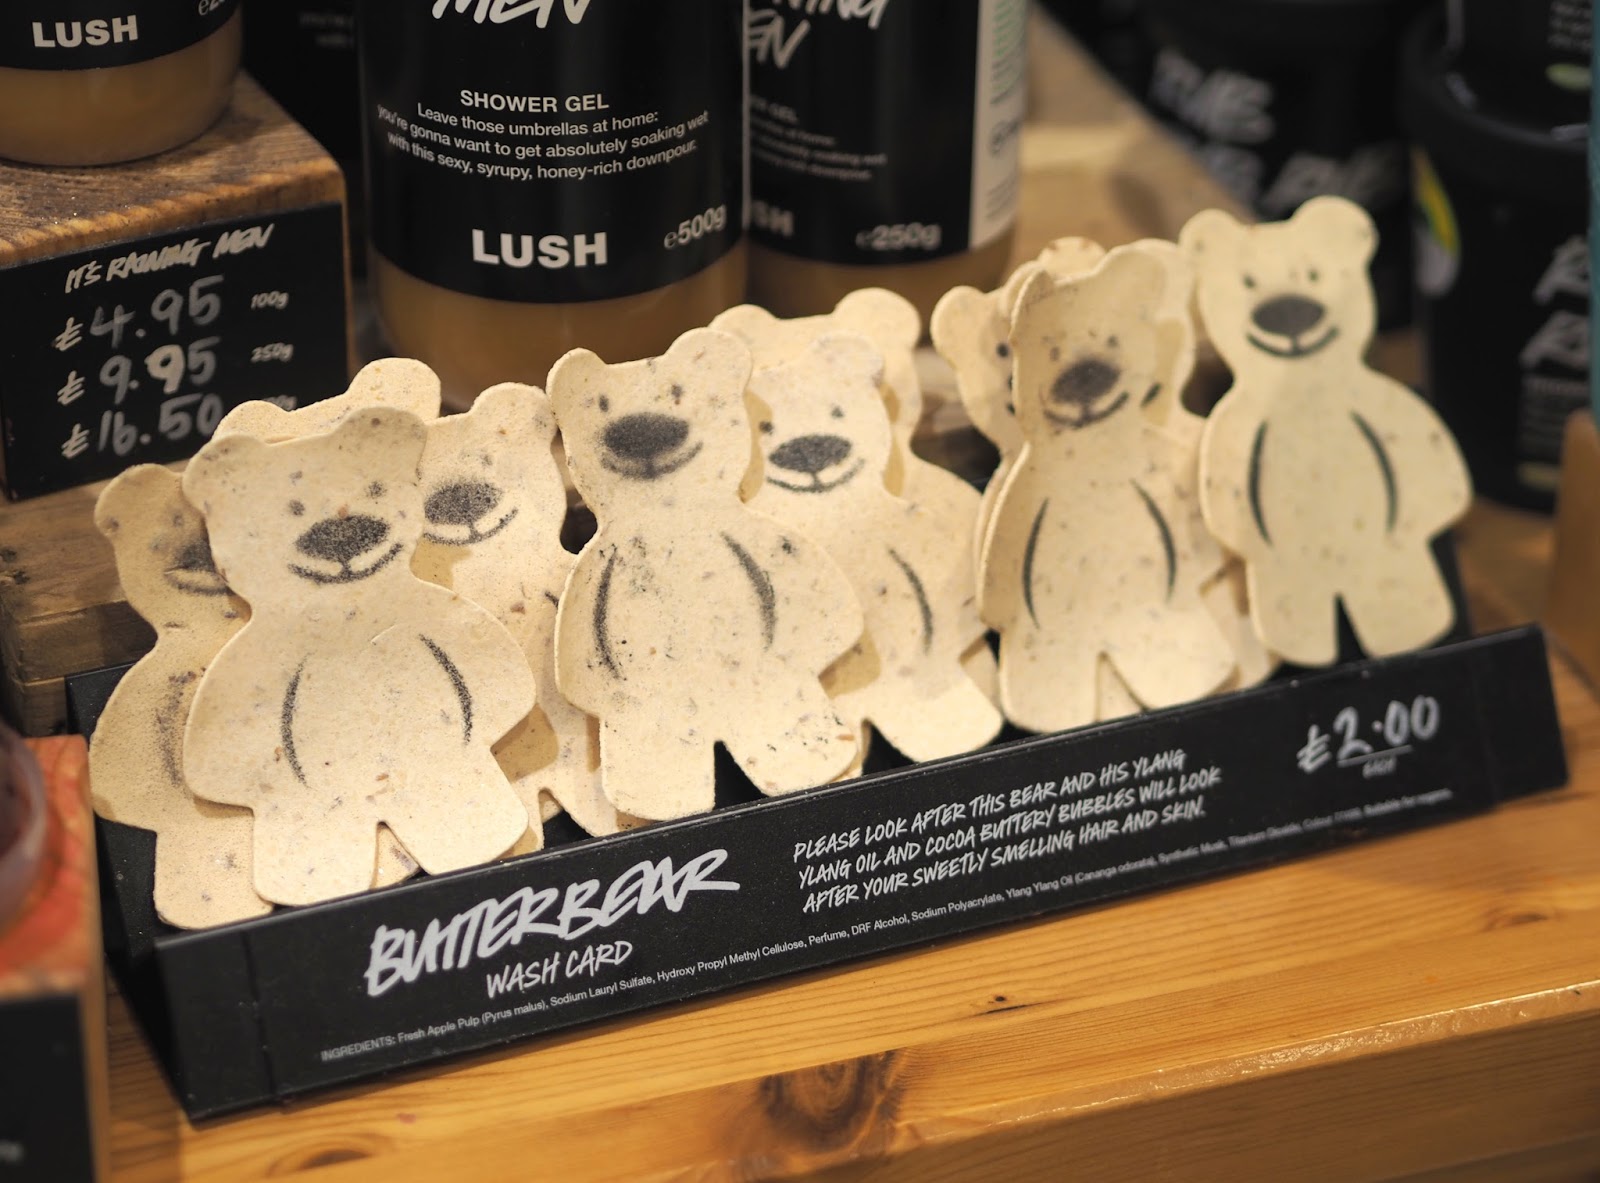 Lush Naked Products: Lush Crawley Event, Katie Kirk Loves, UK Blogger, Beauty Blogger, Organic Beauty, Natural Beauty Products, Lush Naked Products, Lush Cosmetics, Naked Packaging, Environmentally Friendly, Save The Environment 